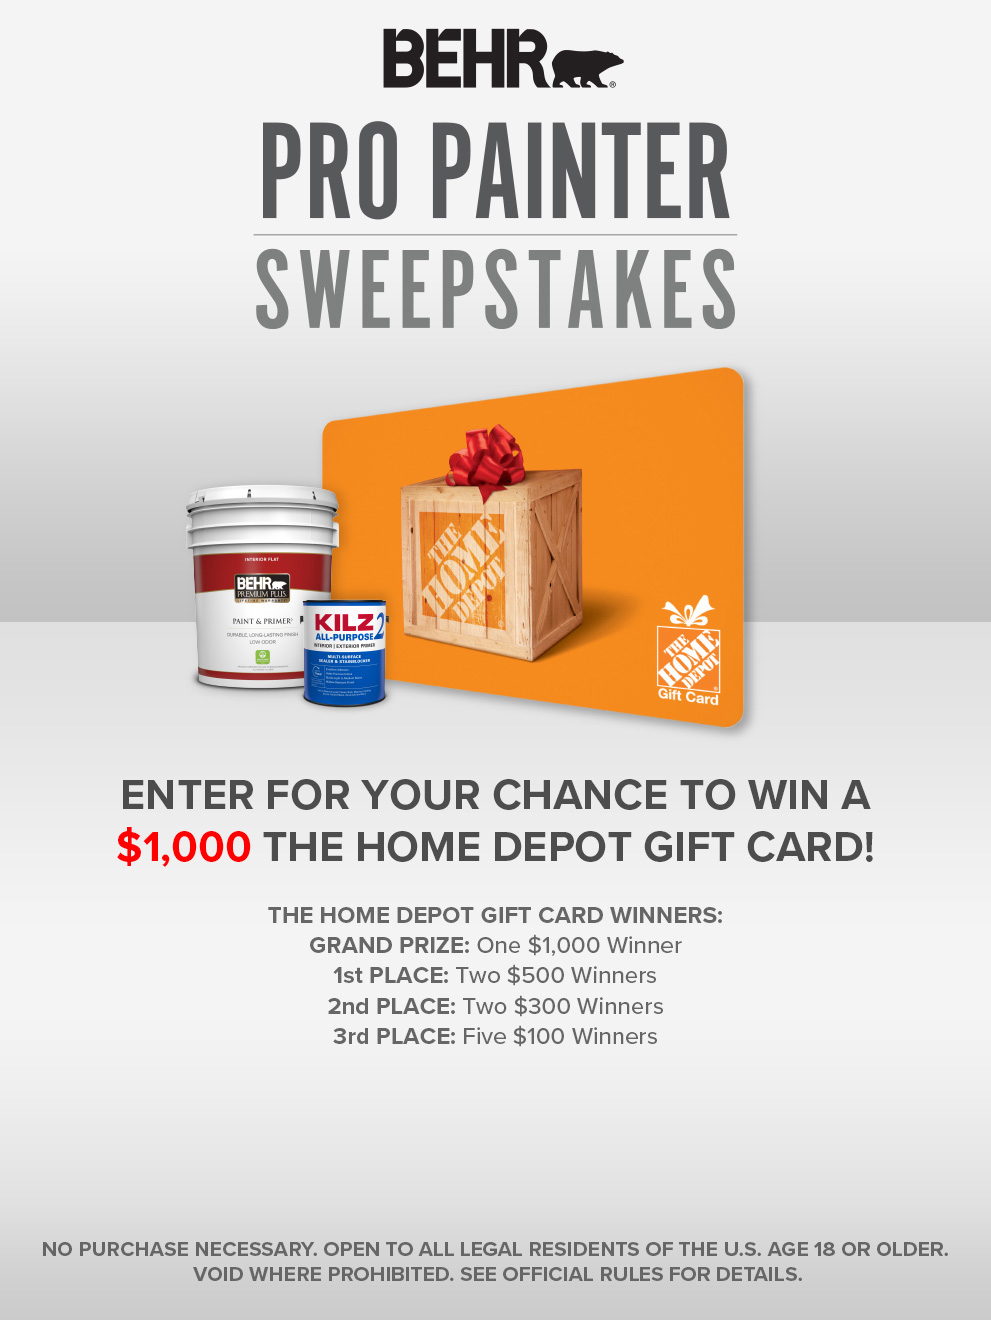 Enter for a Chance to $1,000 The Home Depot Gift Card